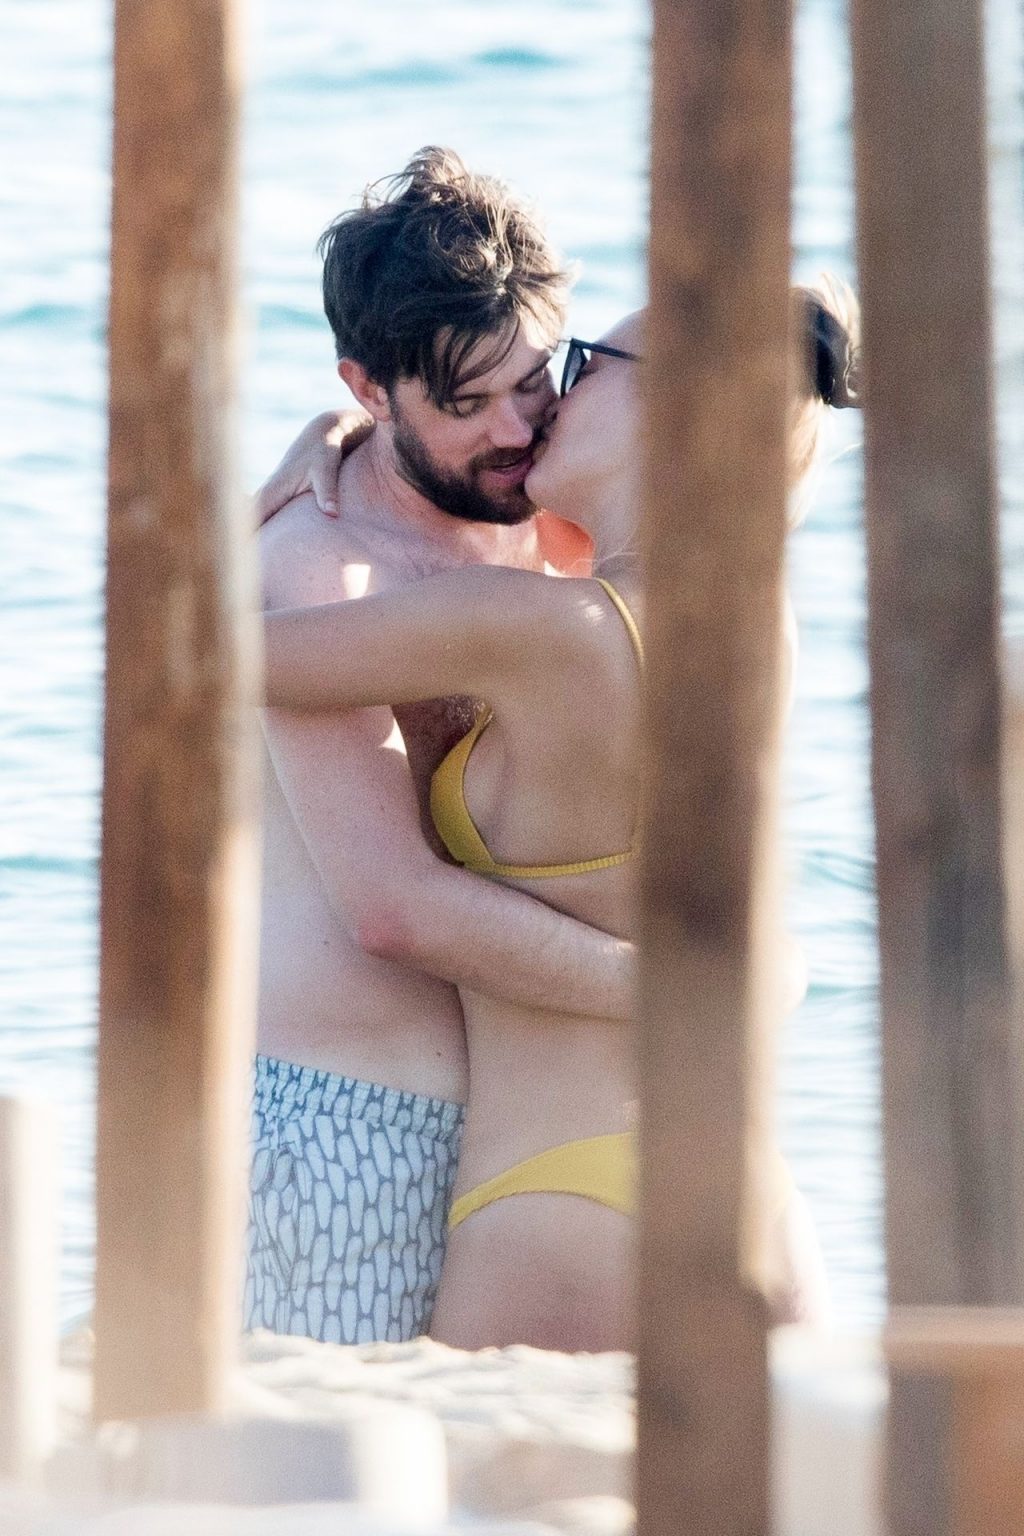 Jack Whitehall &amp; Roxy Horner Pack on the PDA while Vacationing in Greece (23 Photos)